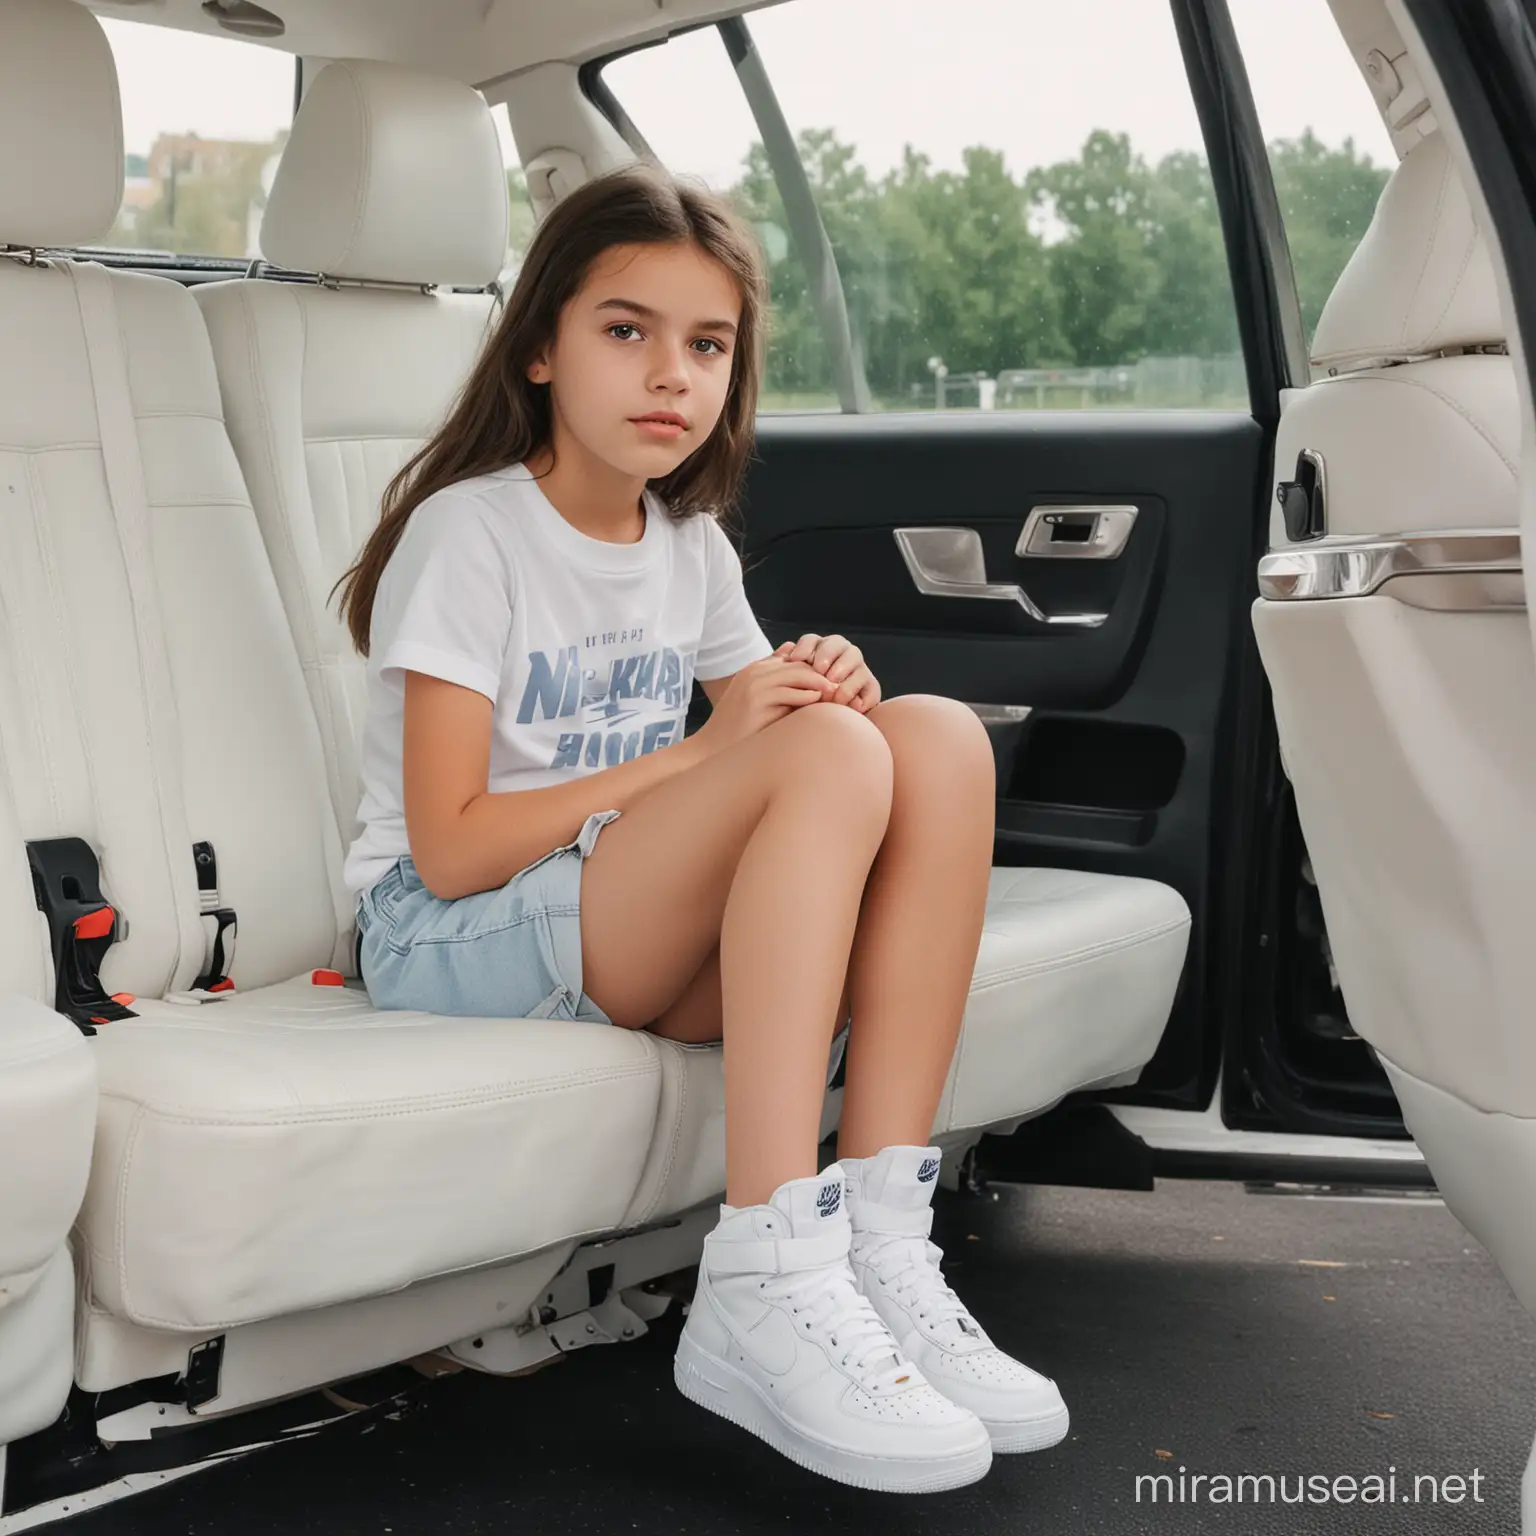 Focus on full body image girl aged 13 siting in front passenger seat vew from front passenger side with legs visible inside wearing white nike air force high shoes and shorts